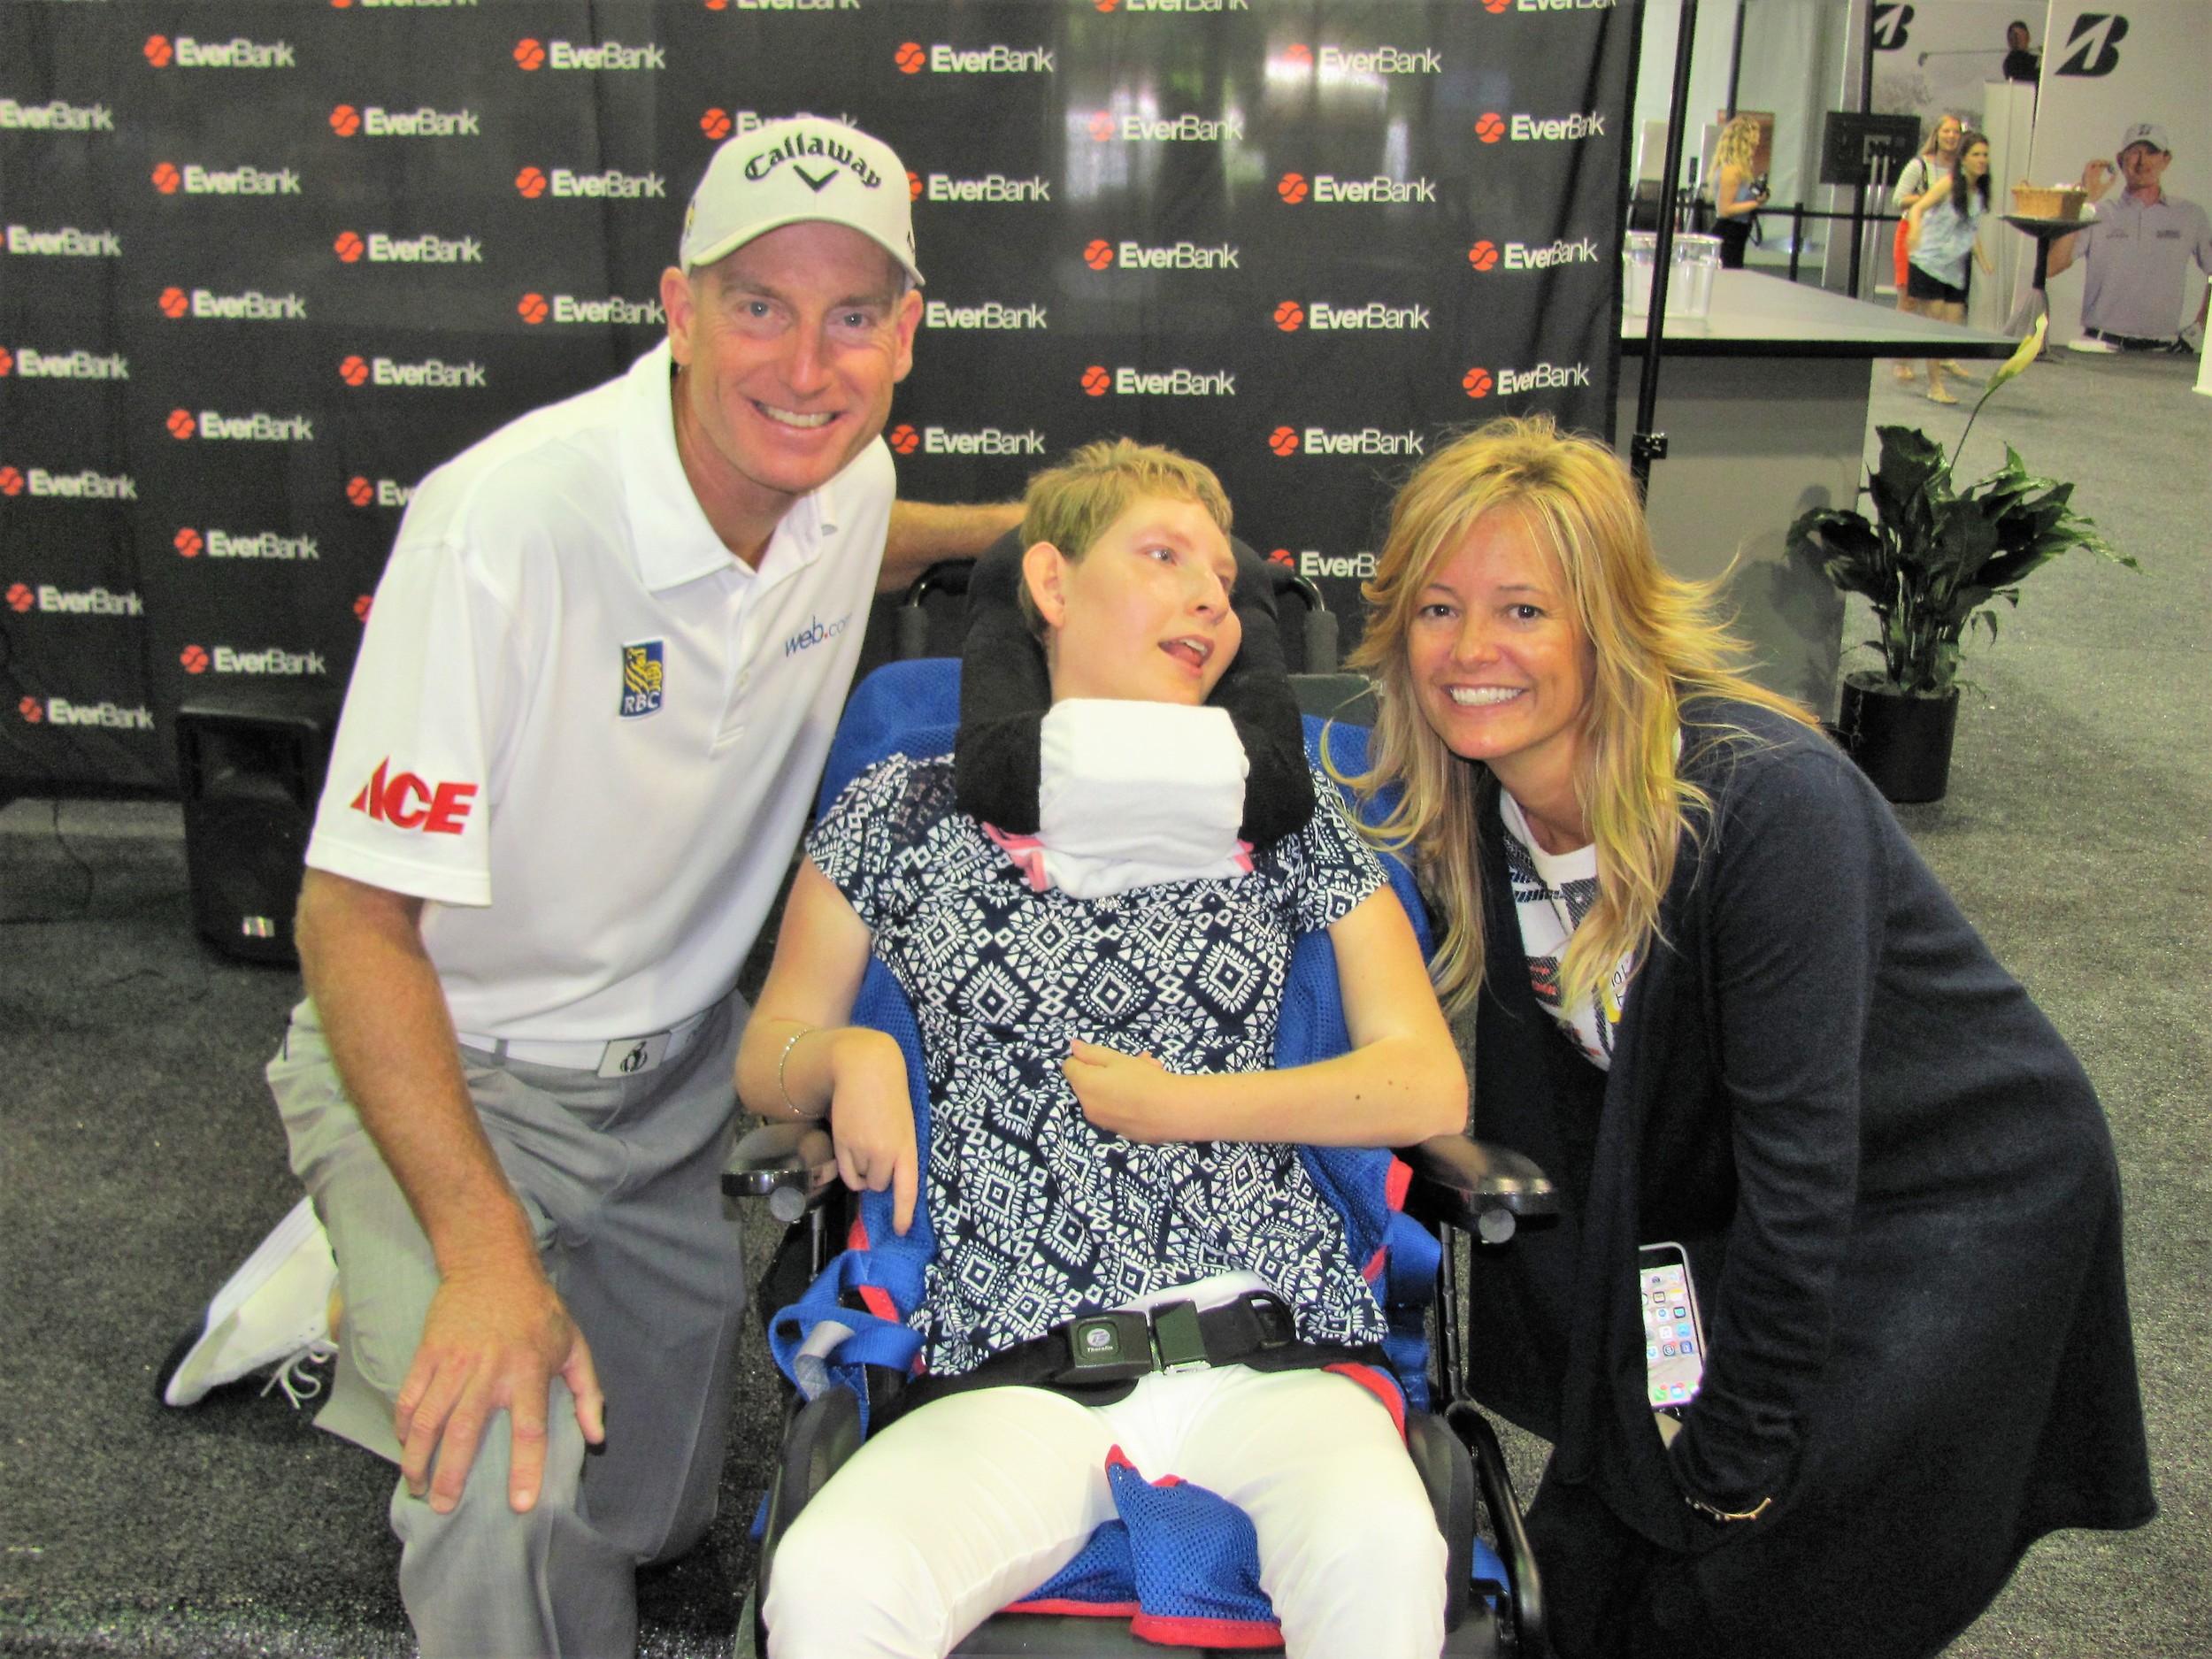 Jim and Tabitha Furyk greet one of the children from Community PedsCare.